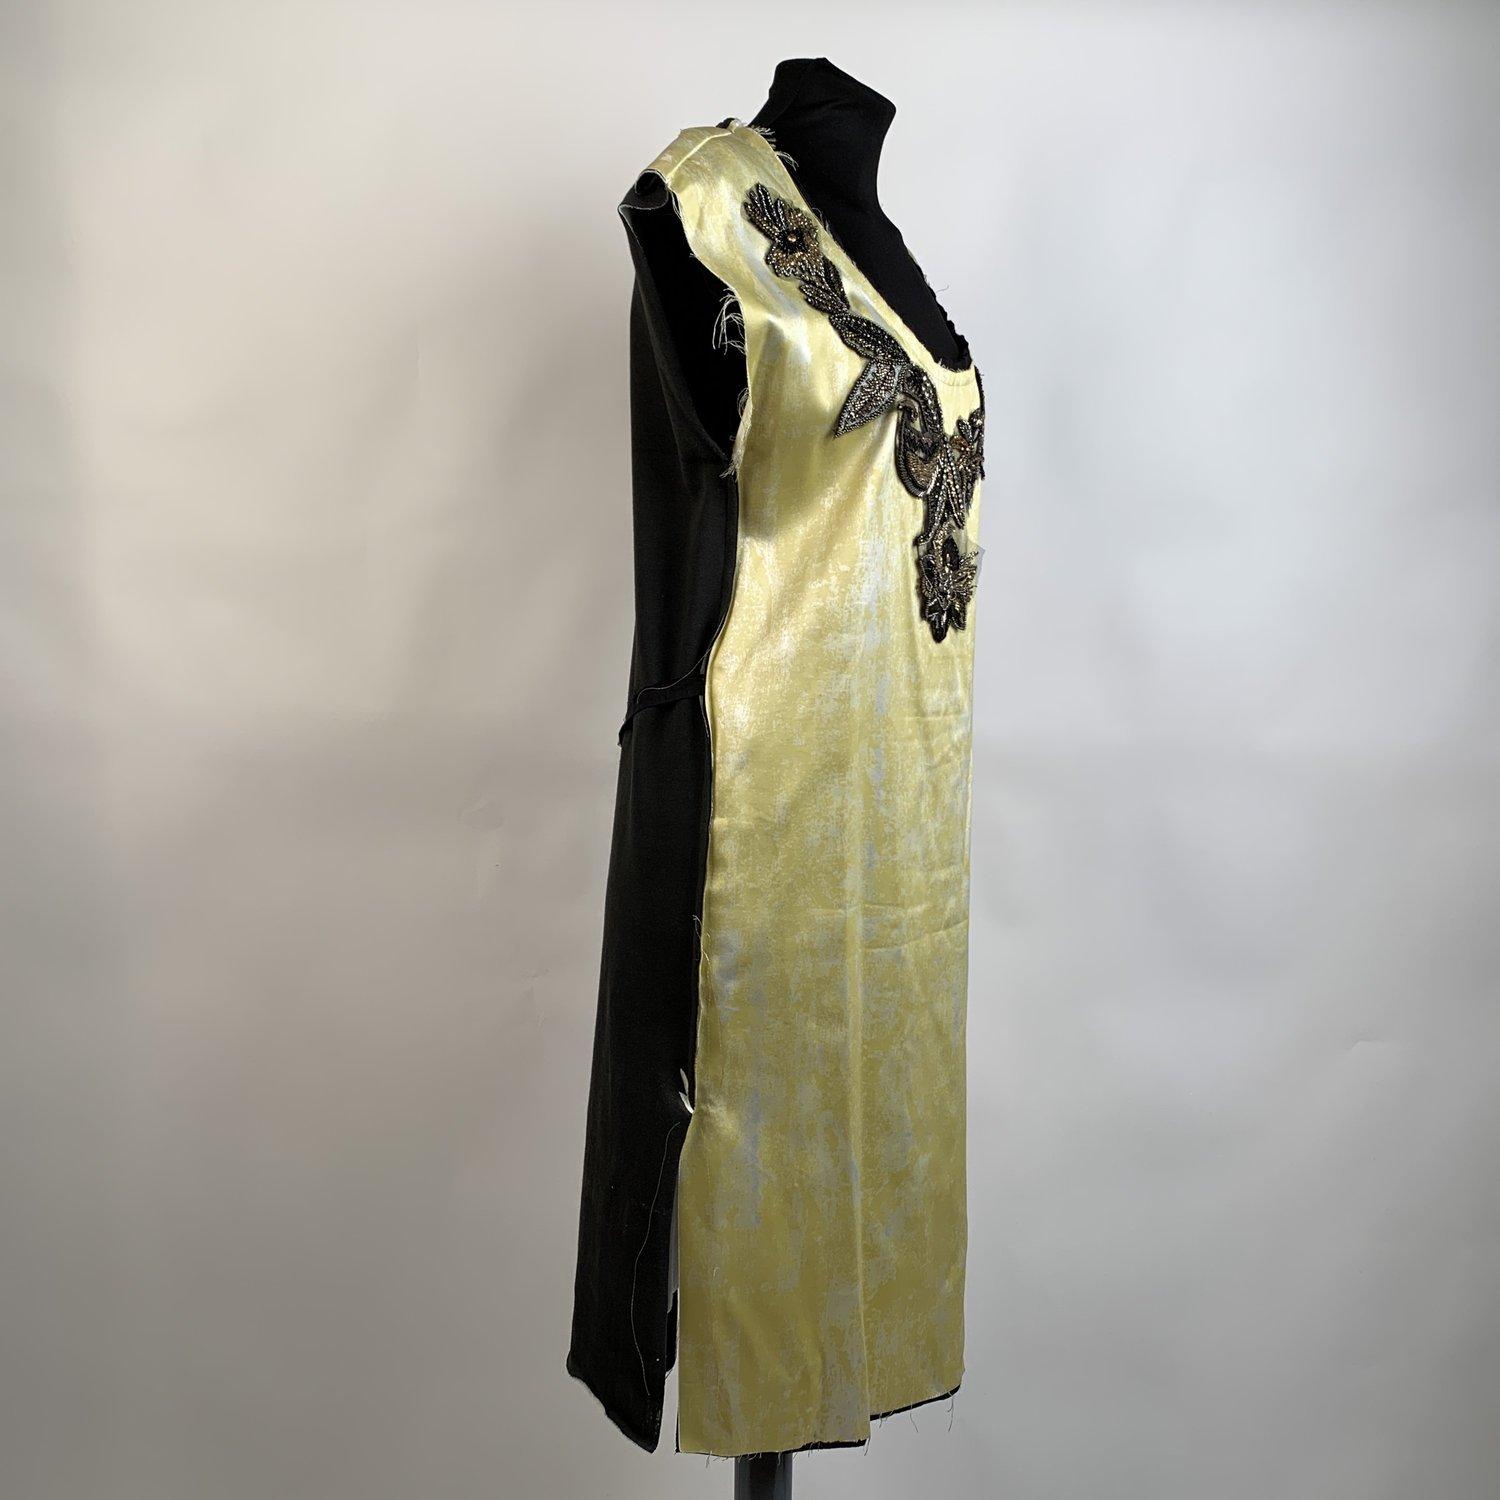 Description - Vivienne Westwood Red Label Yellow Spring 2016 Dress Size 40 - Sleeveless design - Beaded applique embellishment on the front - Raw cut along the edges of the dress - Round neckline - Self-tie straps at the waist - Main Fabric: 95%